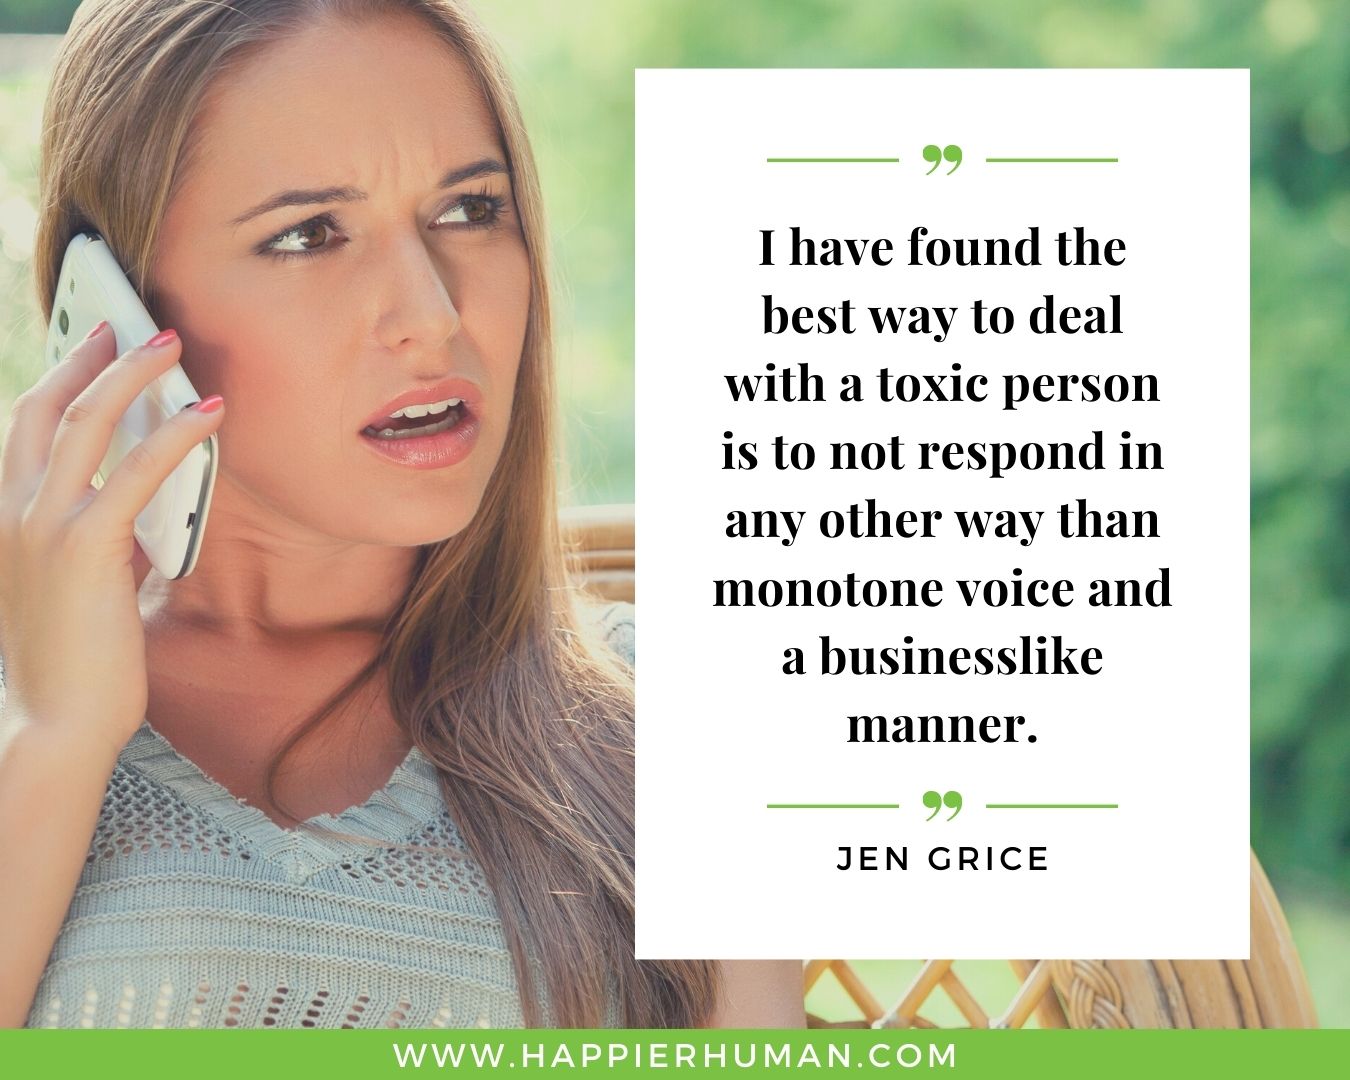 Toxic People Quotes - “I have found the best way to deal with a toxic person is to not respond in any other way than monotone voice and a businesslike manner.” – Jen Grice